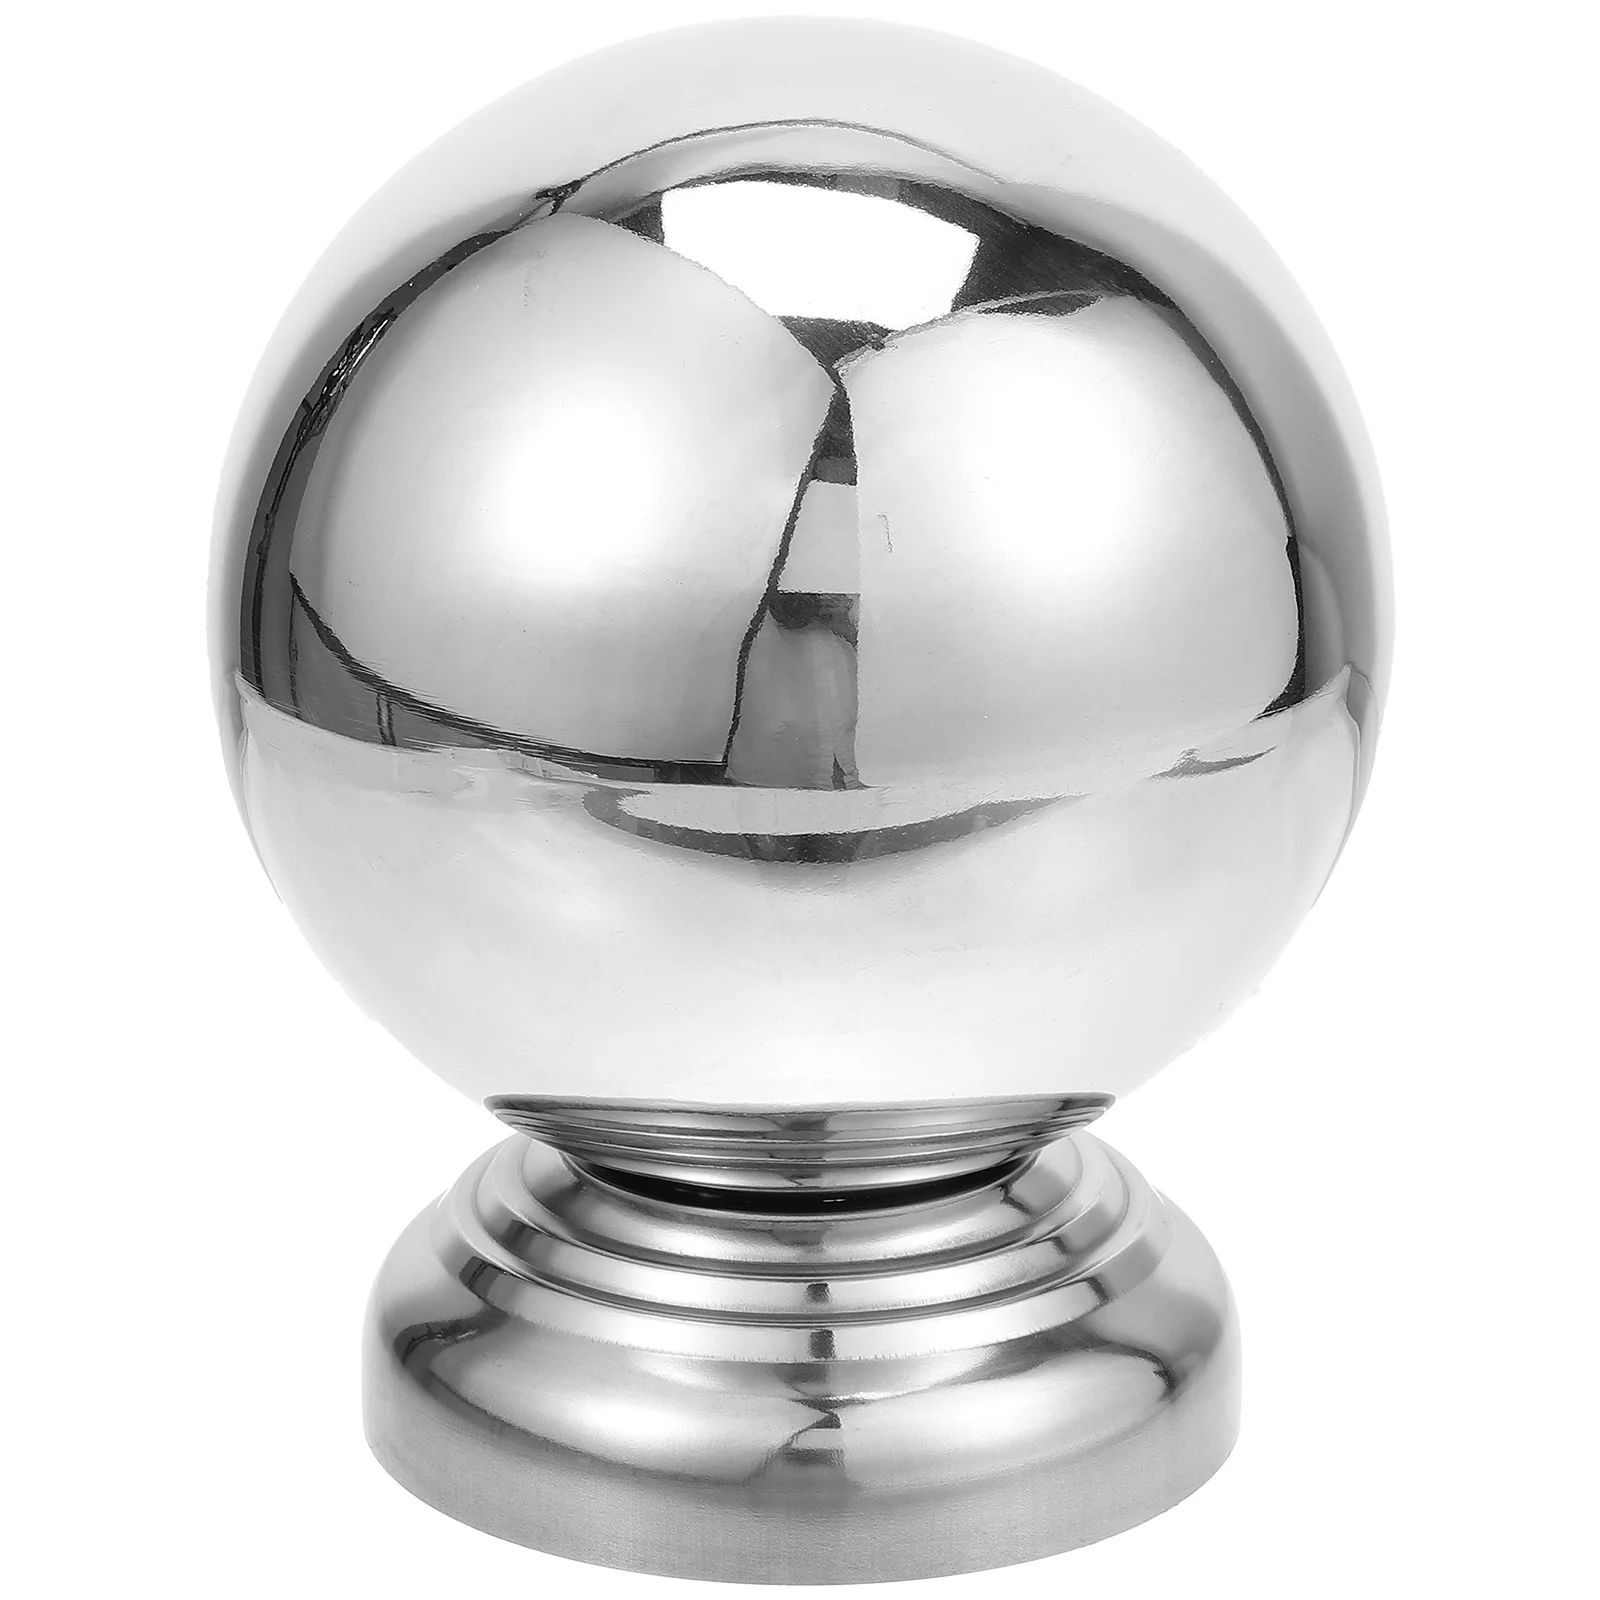 

Garden Reflection Ball Polished Gazing Outdoor Globe Globes Earth Decorative Stainless Steel